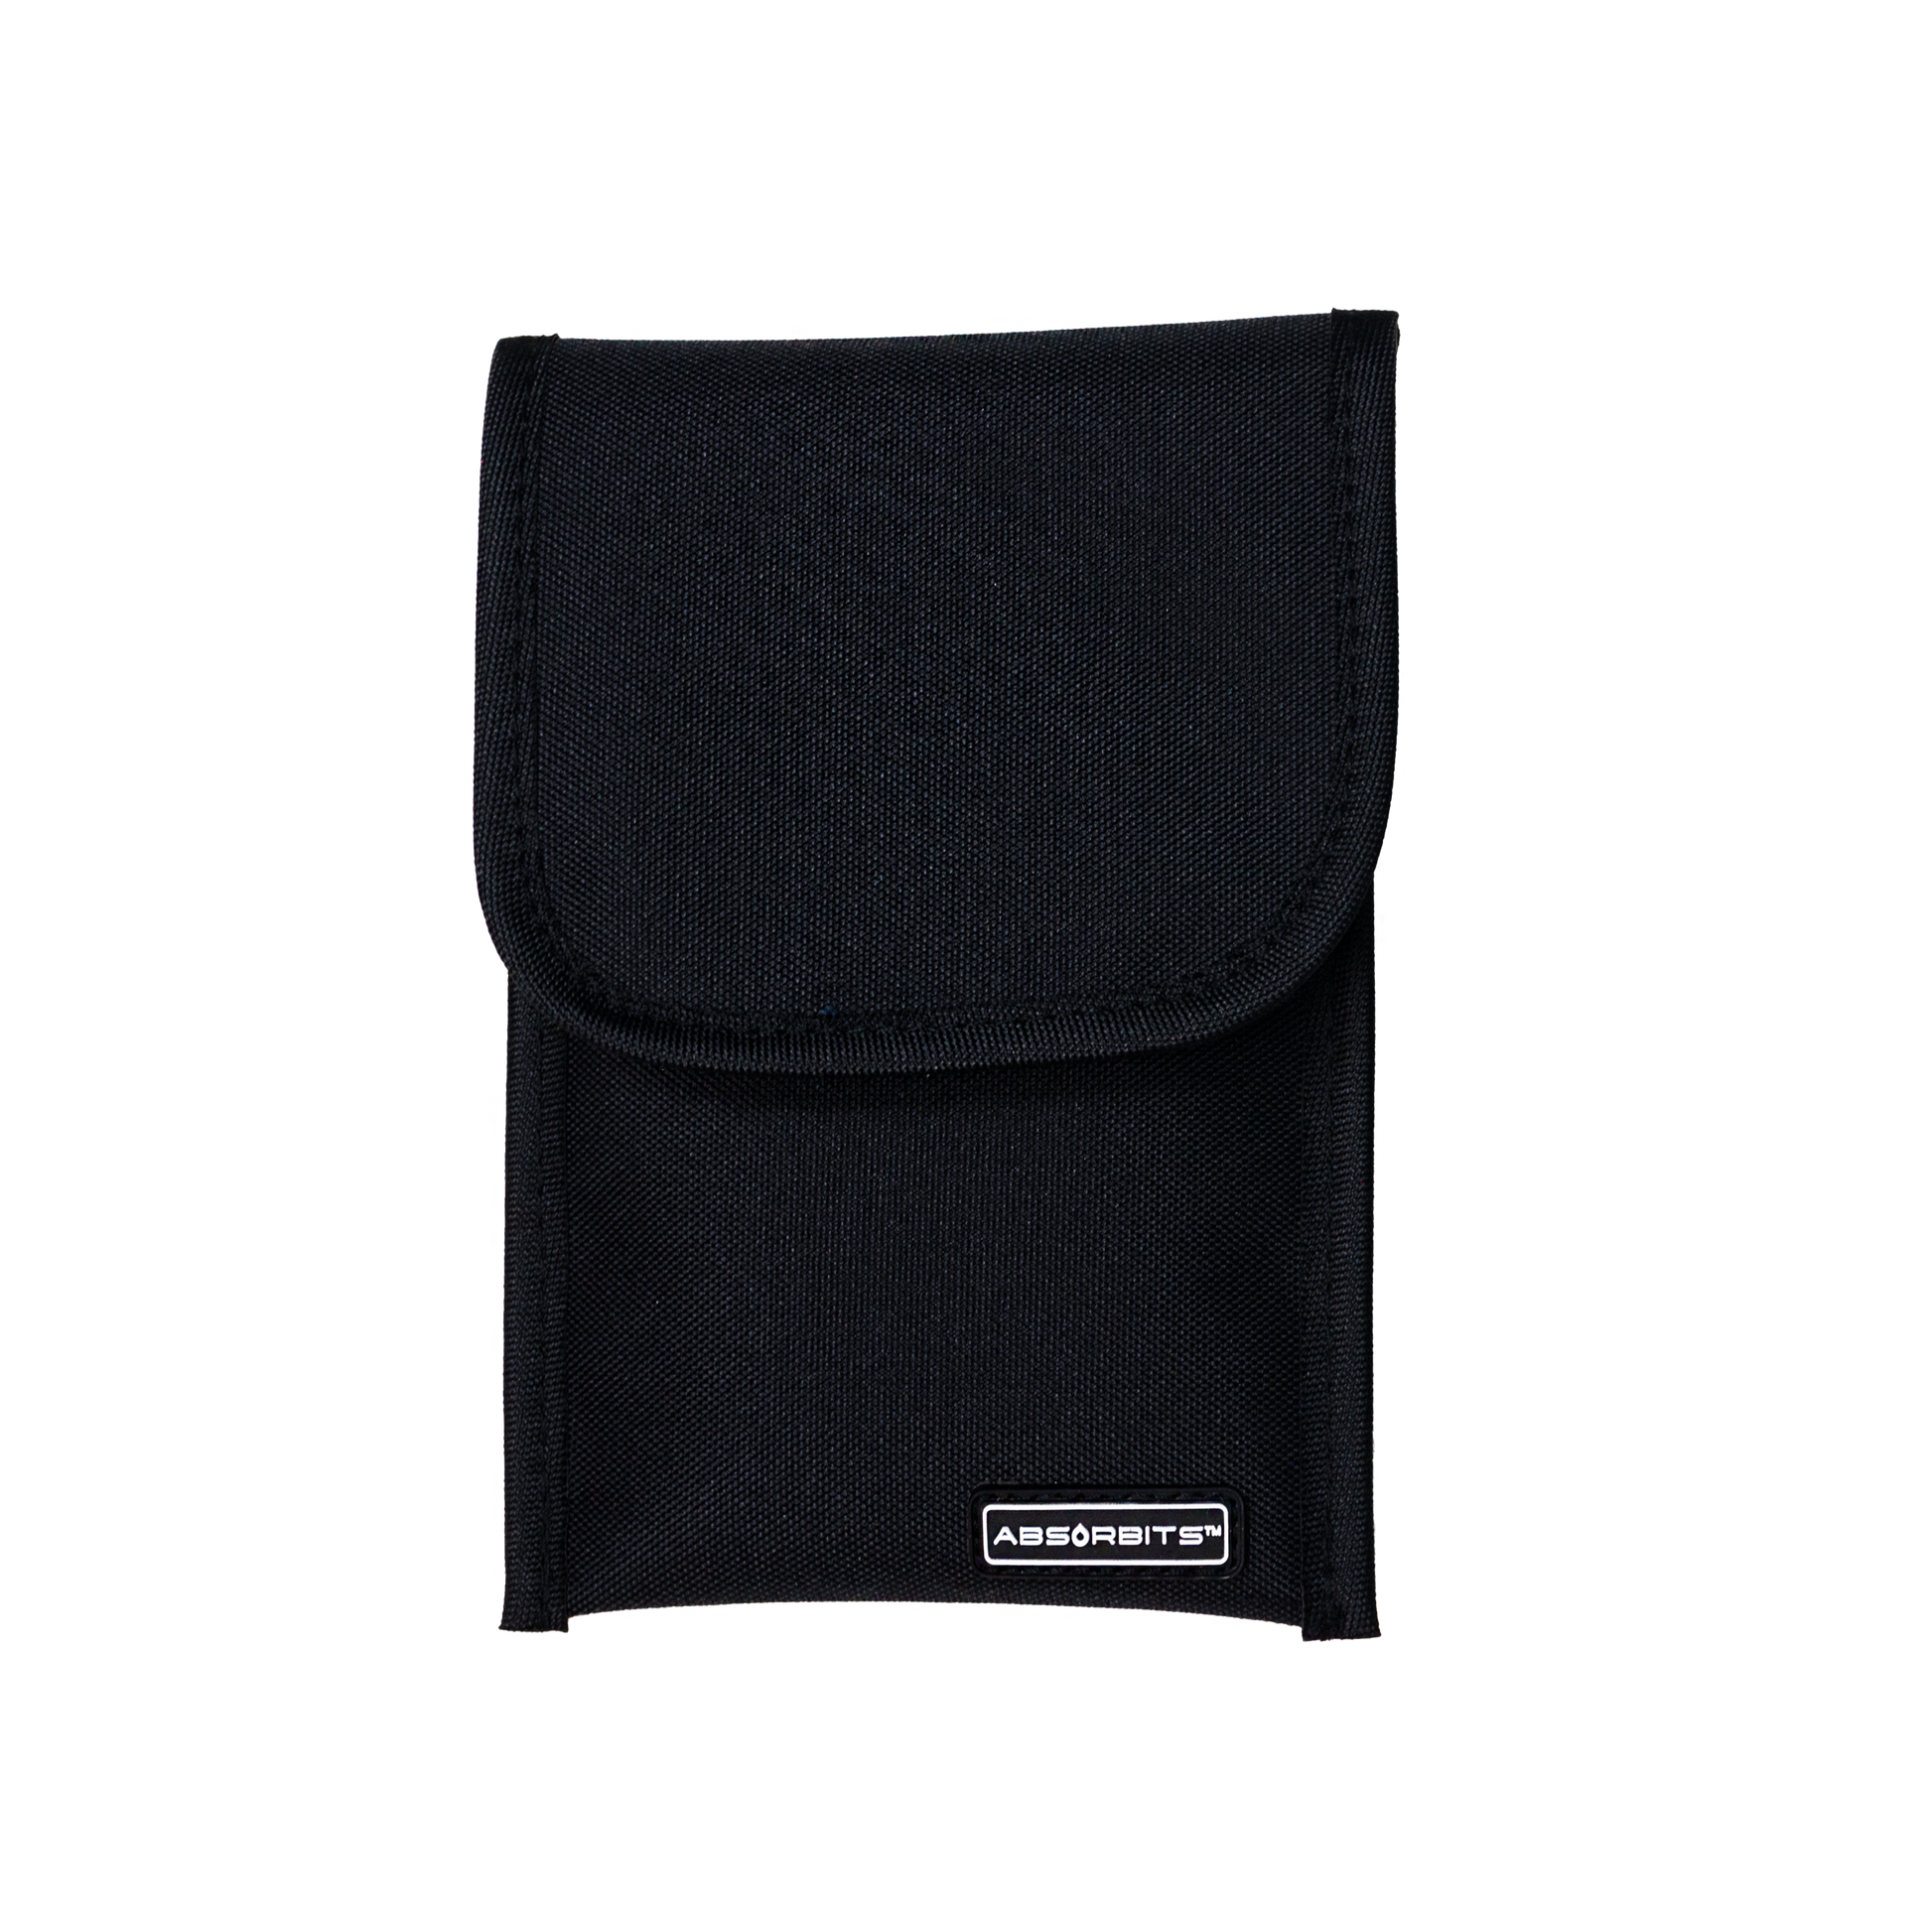 THE WET ELECTRONICS RESCUE POUCH (Small) – Absorbits™